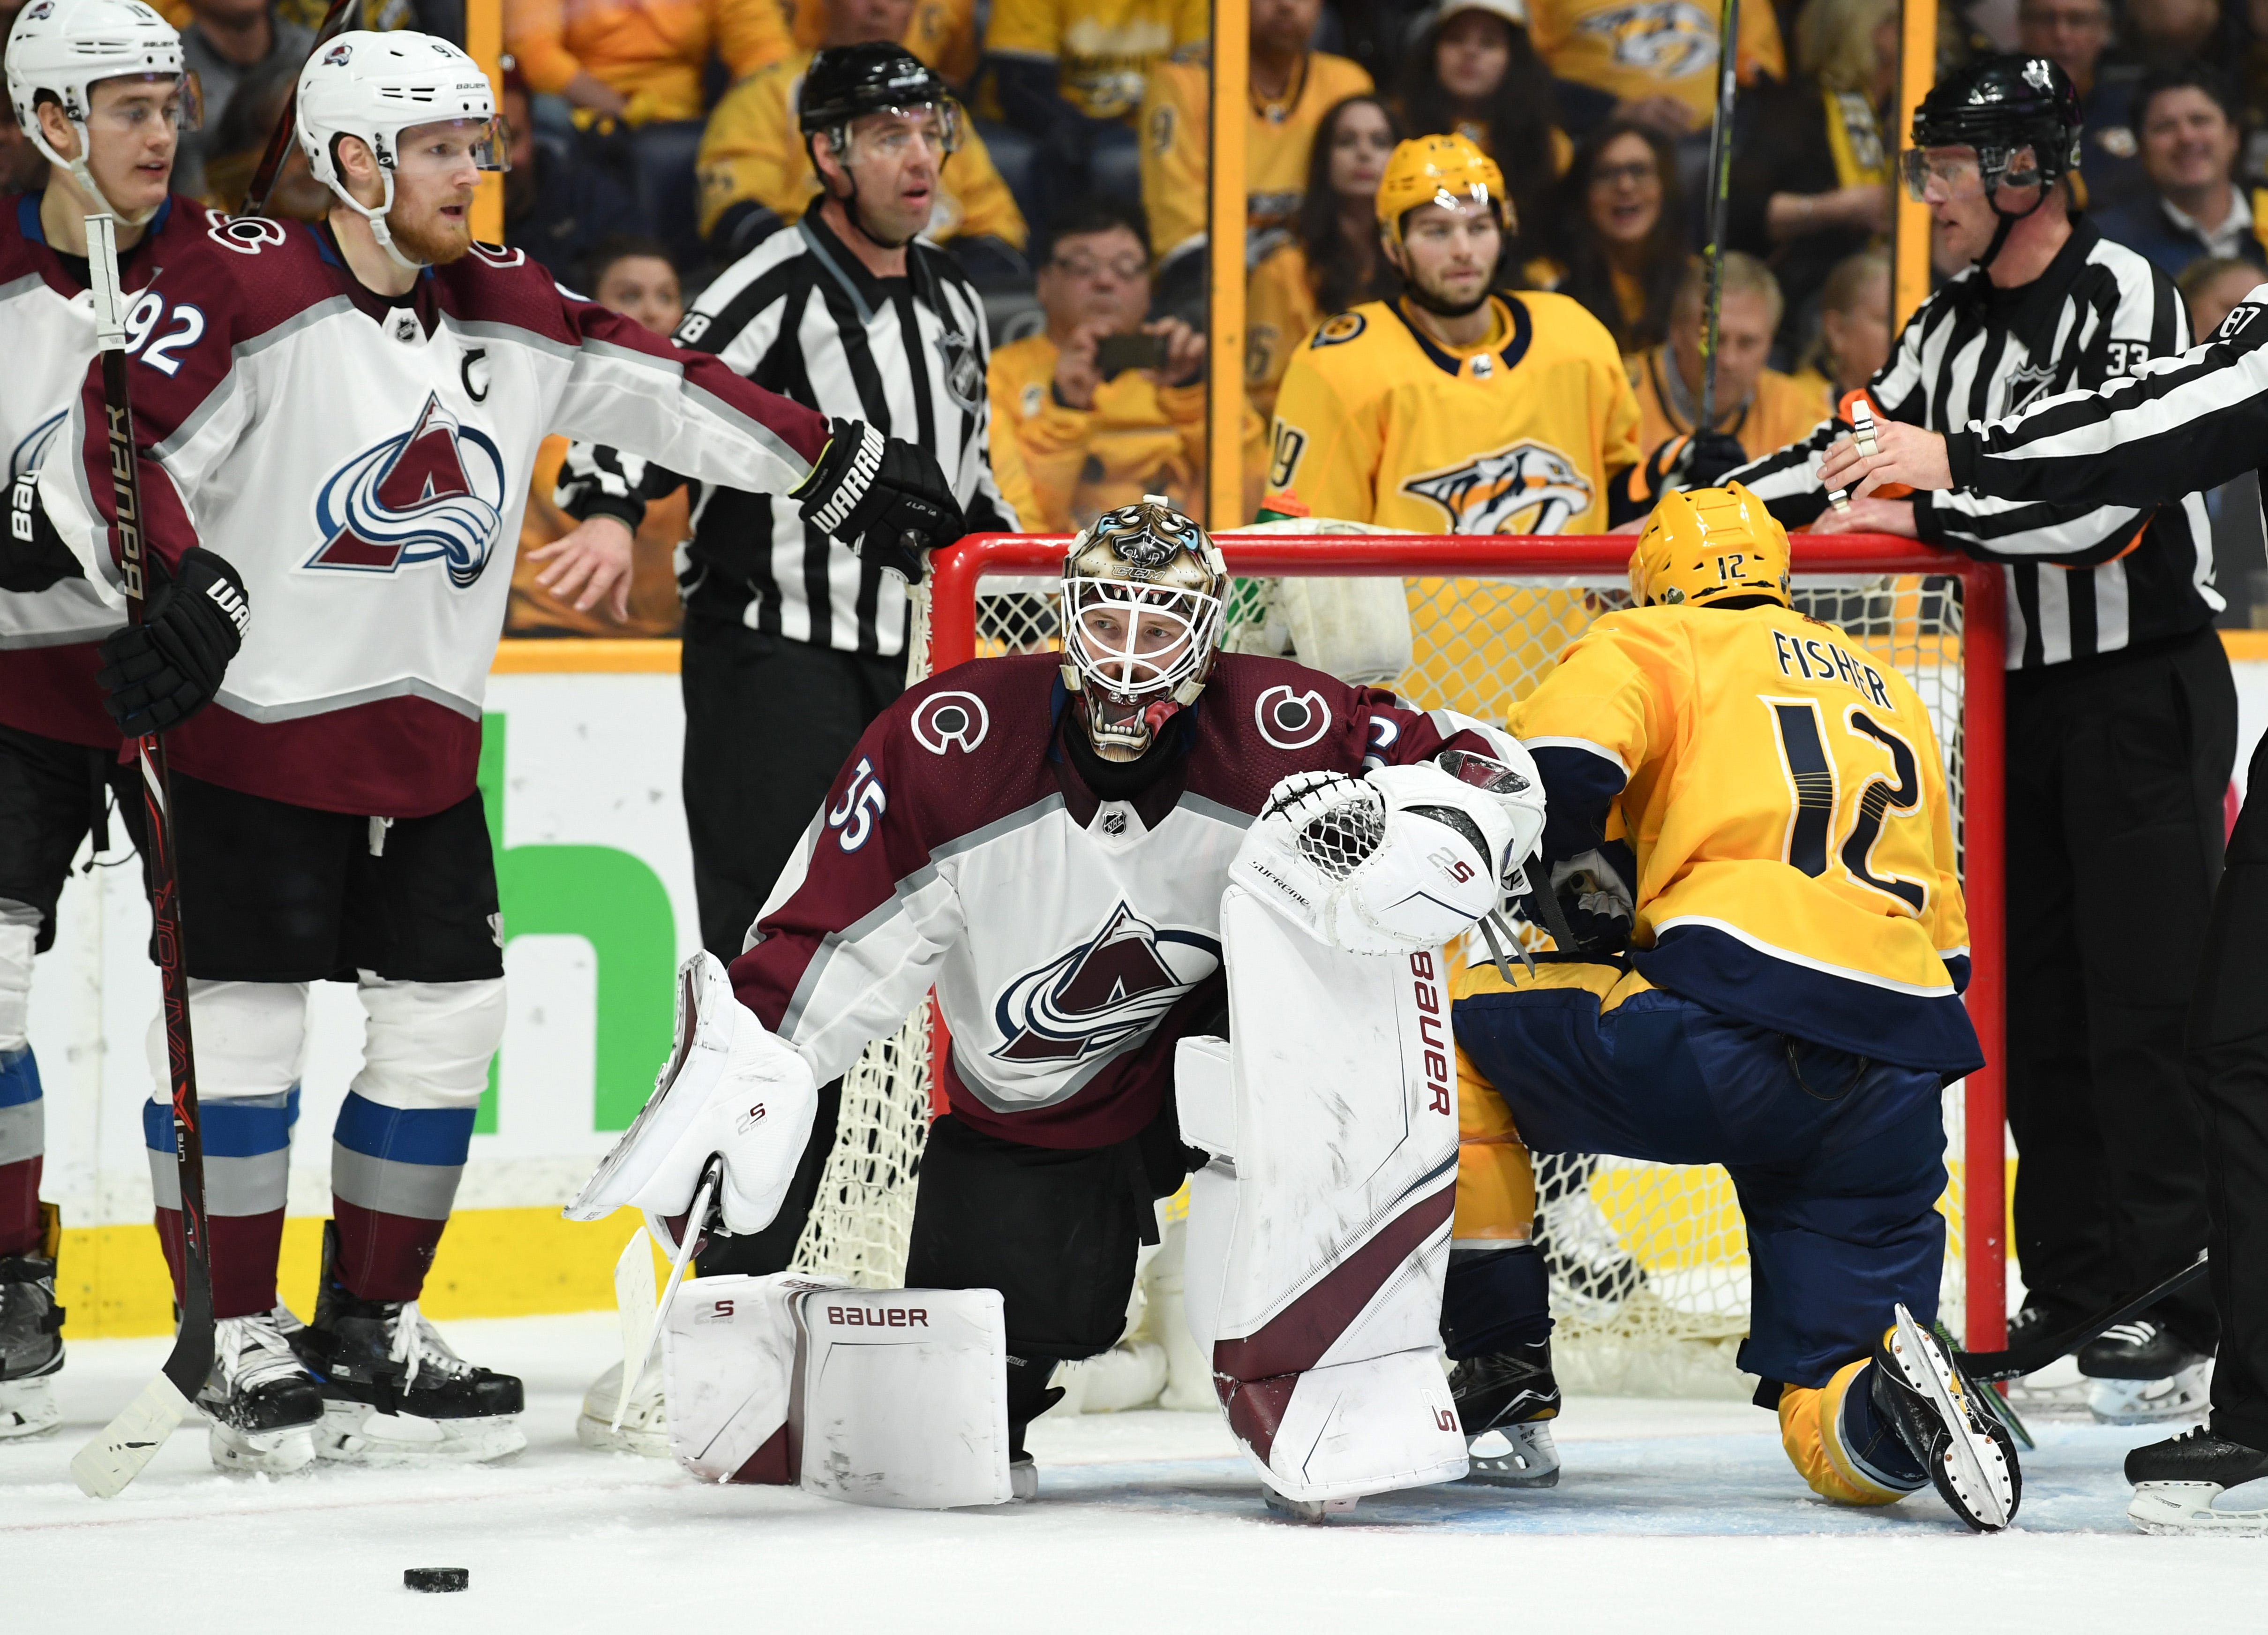 Andrew Hammond made only 1 start all year, but he saved Avalanche's season in Game 5